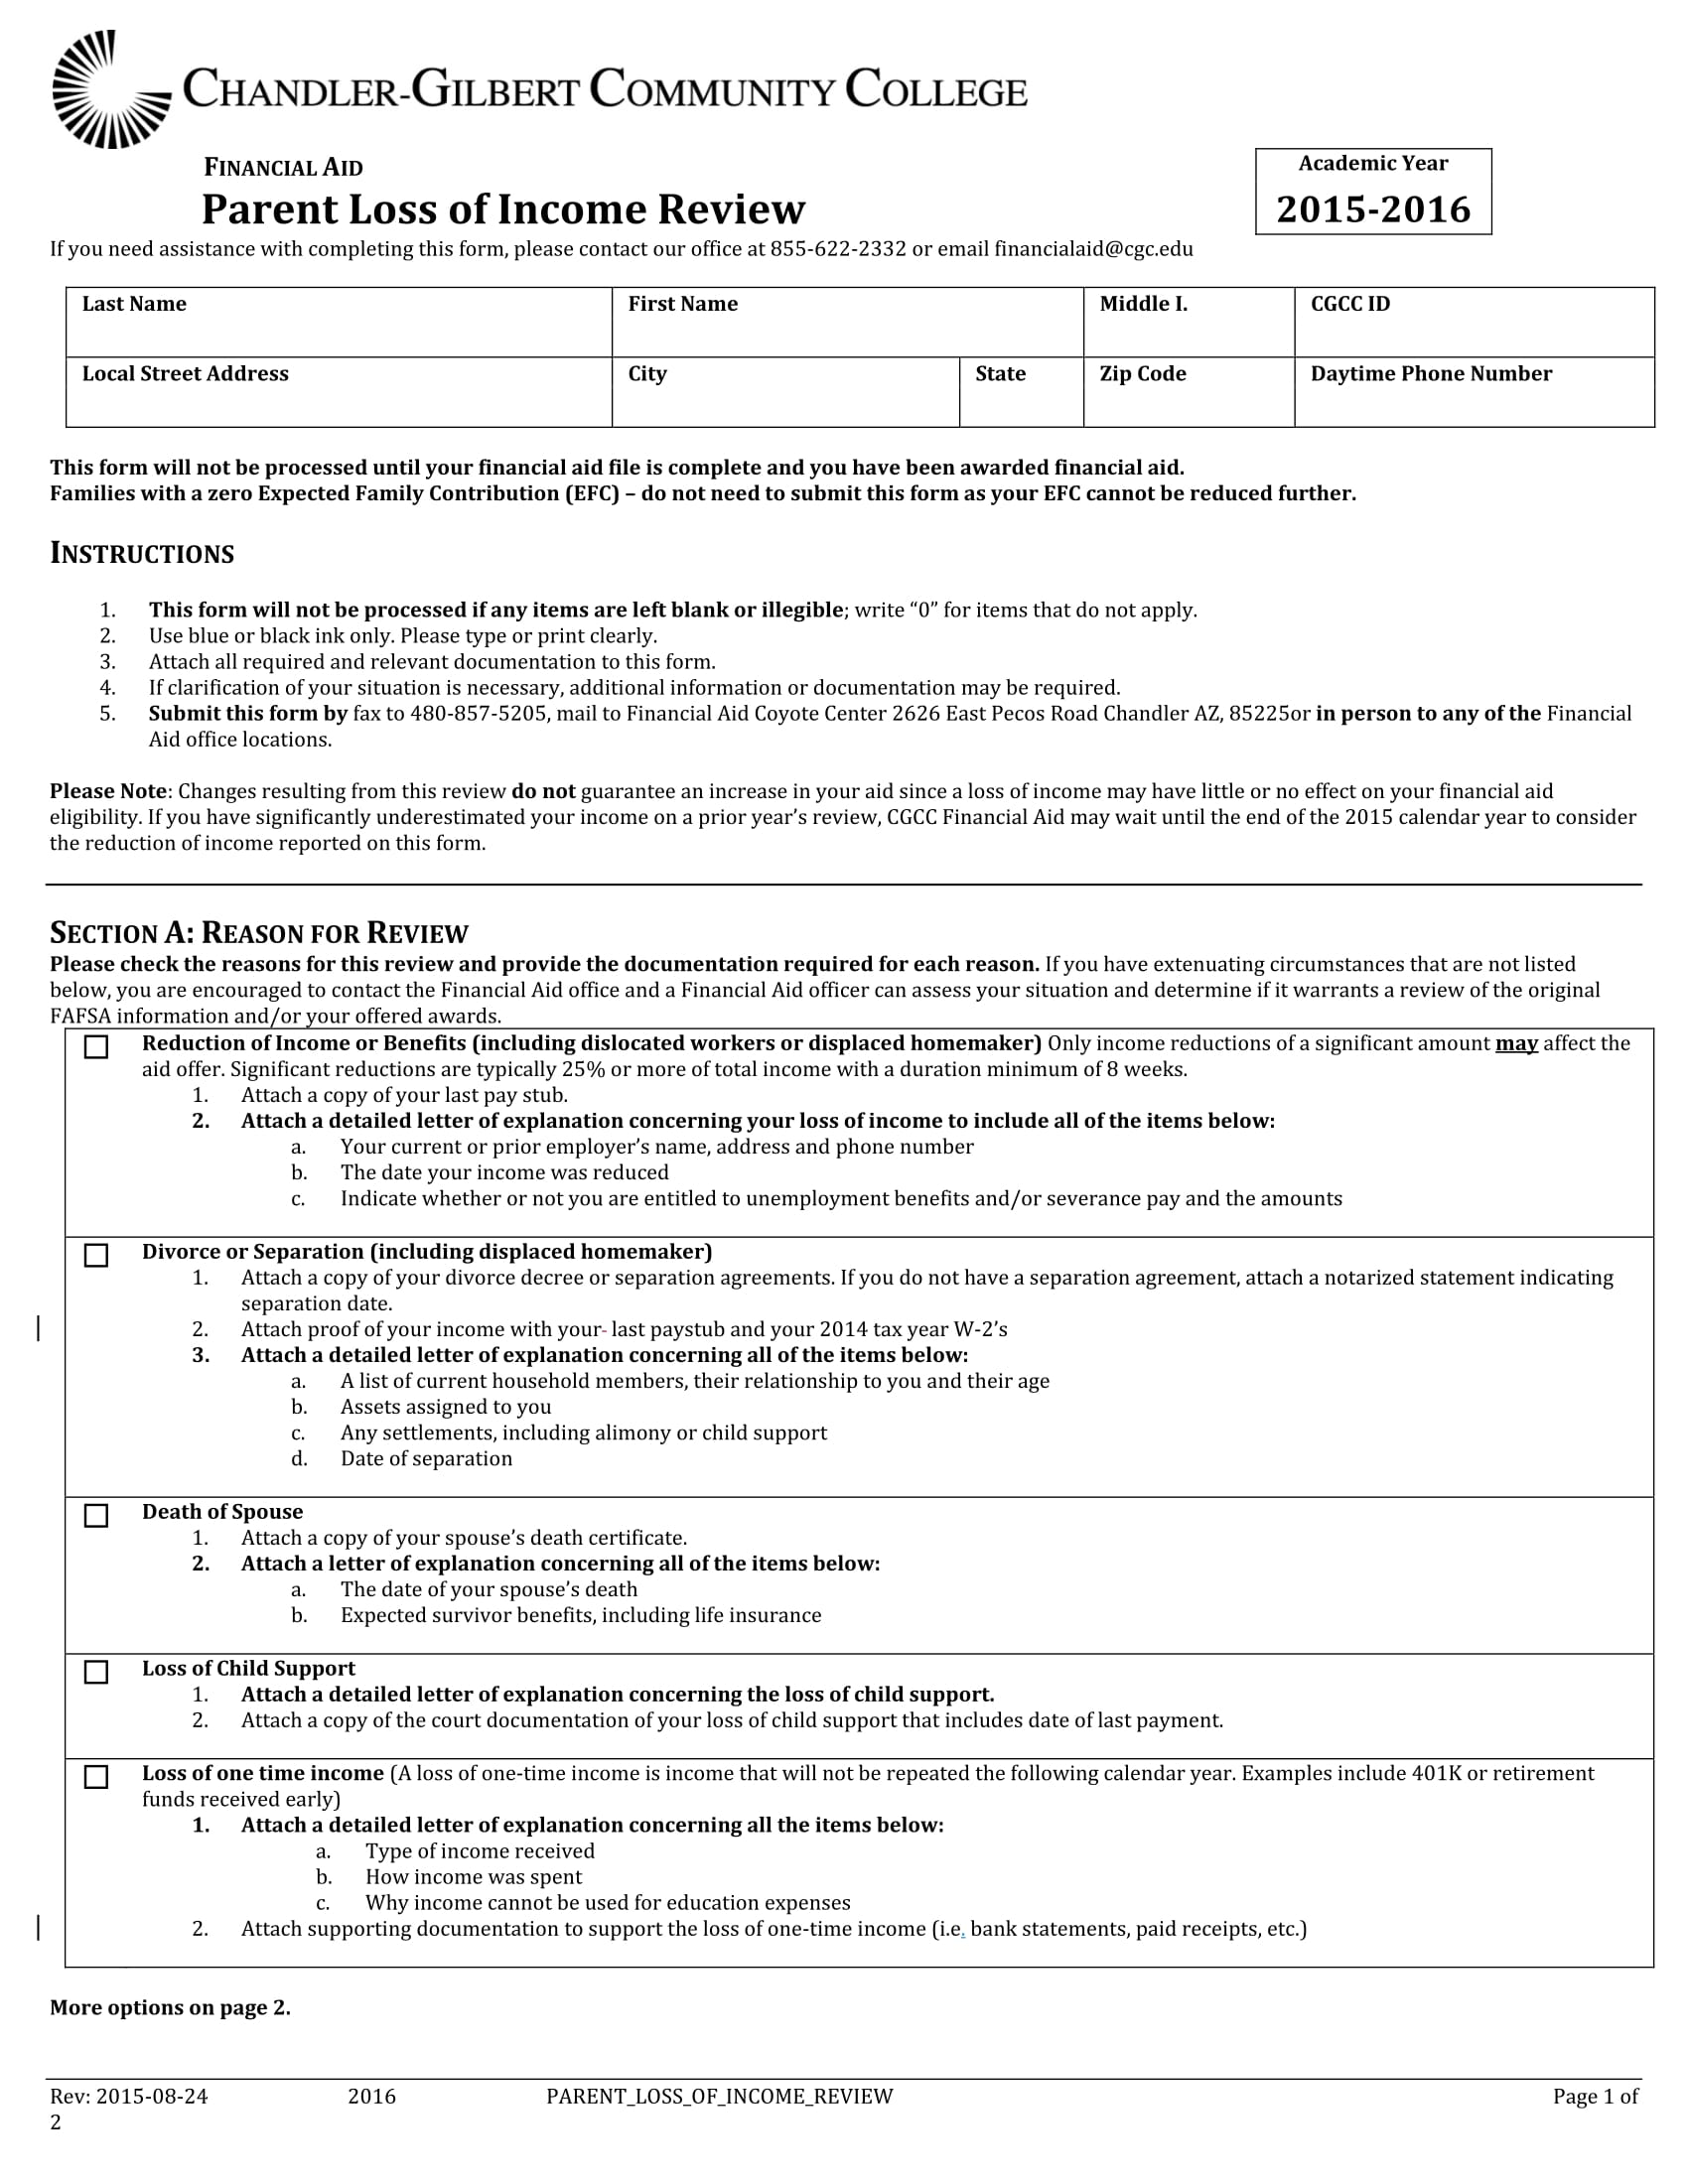 parent loss of income review form 1